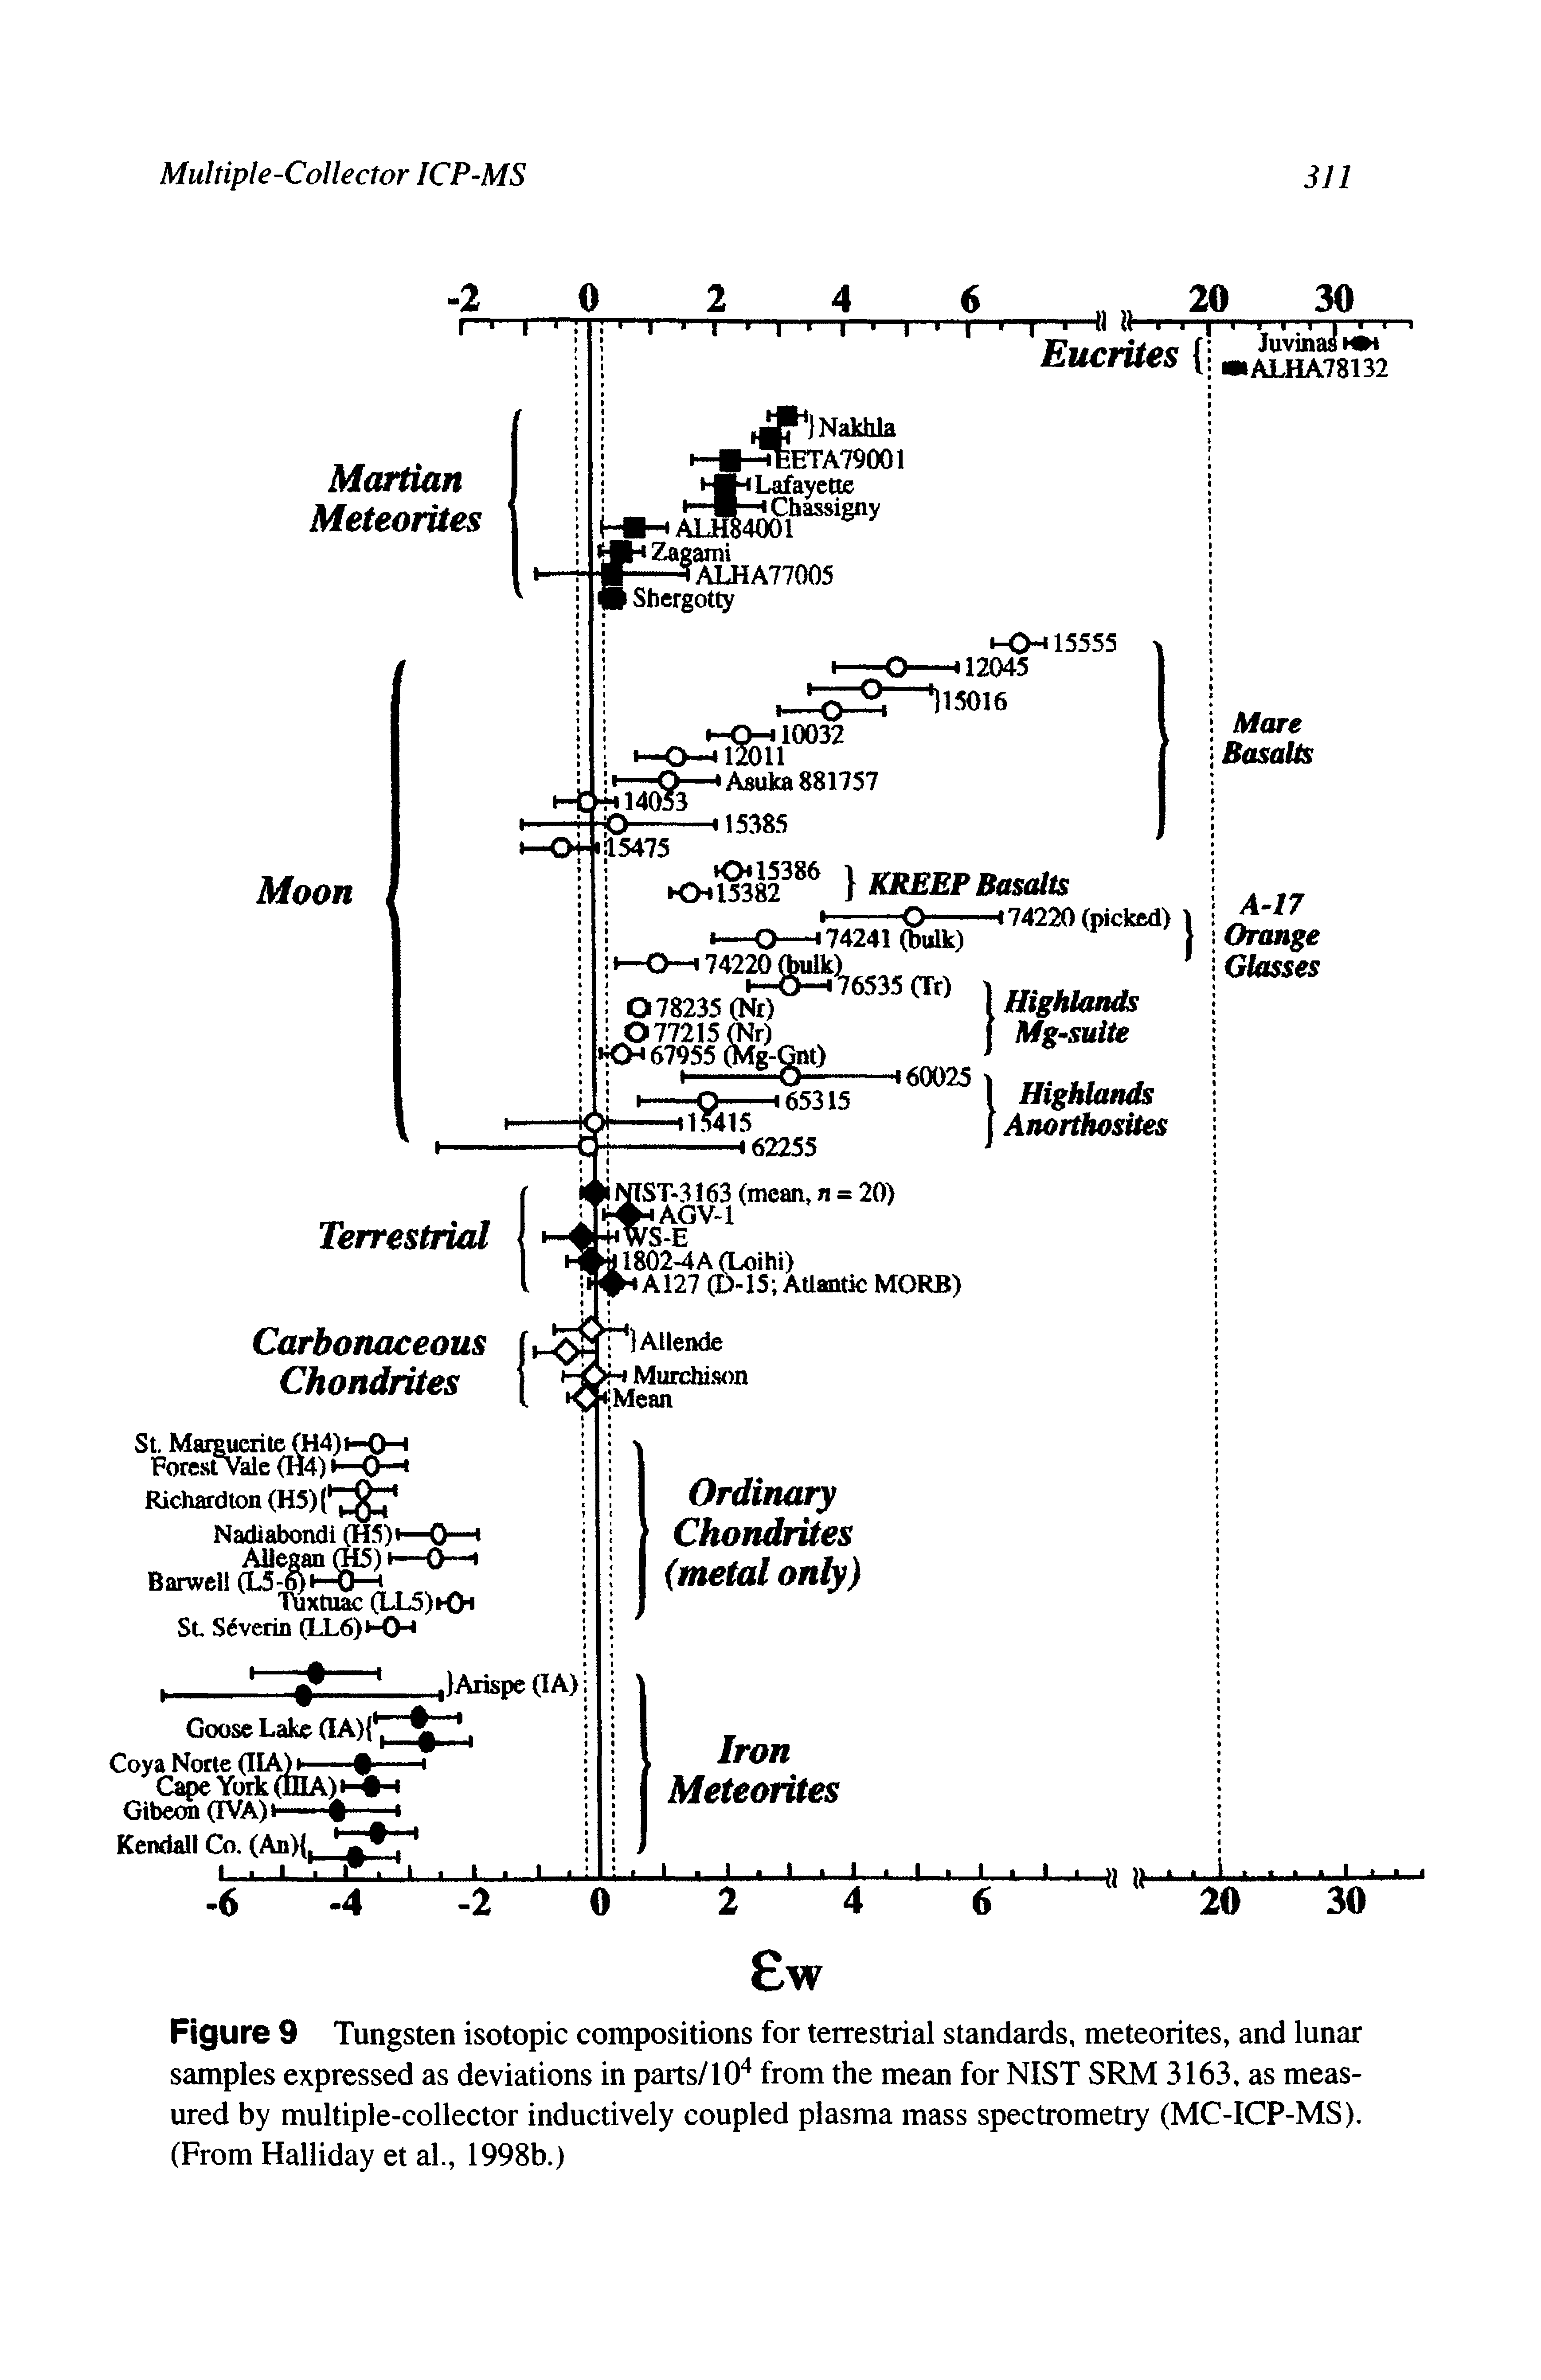 Figure 9 Tungsten isotopic compositions for terrestrial standards, meteorites, and lunar samples expressed as deviations in parts/104 from the mean for NIST SRM 3163, as measured by multiple-collector inductively coupled plasma mass spectrometry (MC-ICP-MS). (From Halliday et al., 1998b.)...